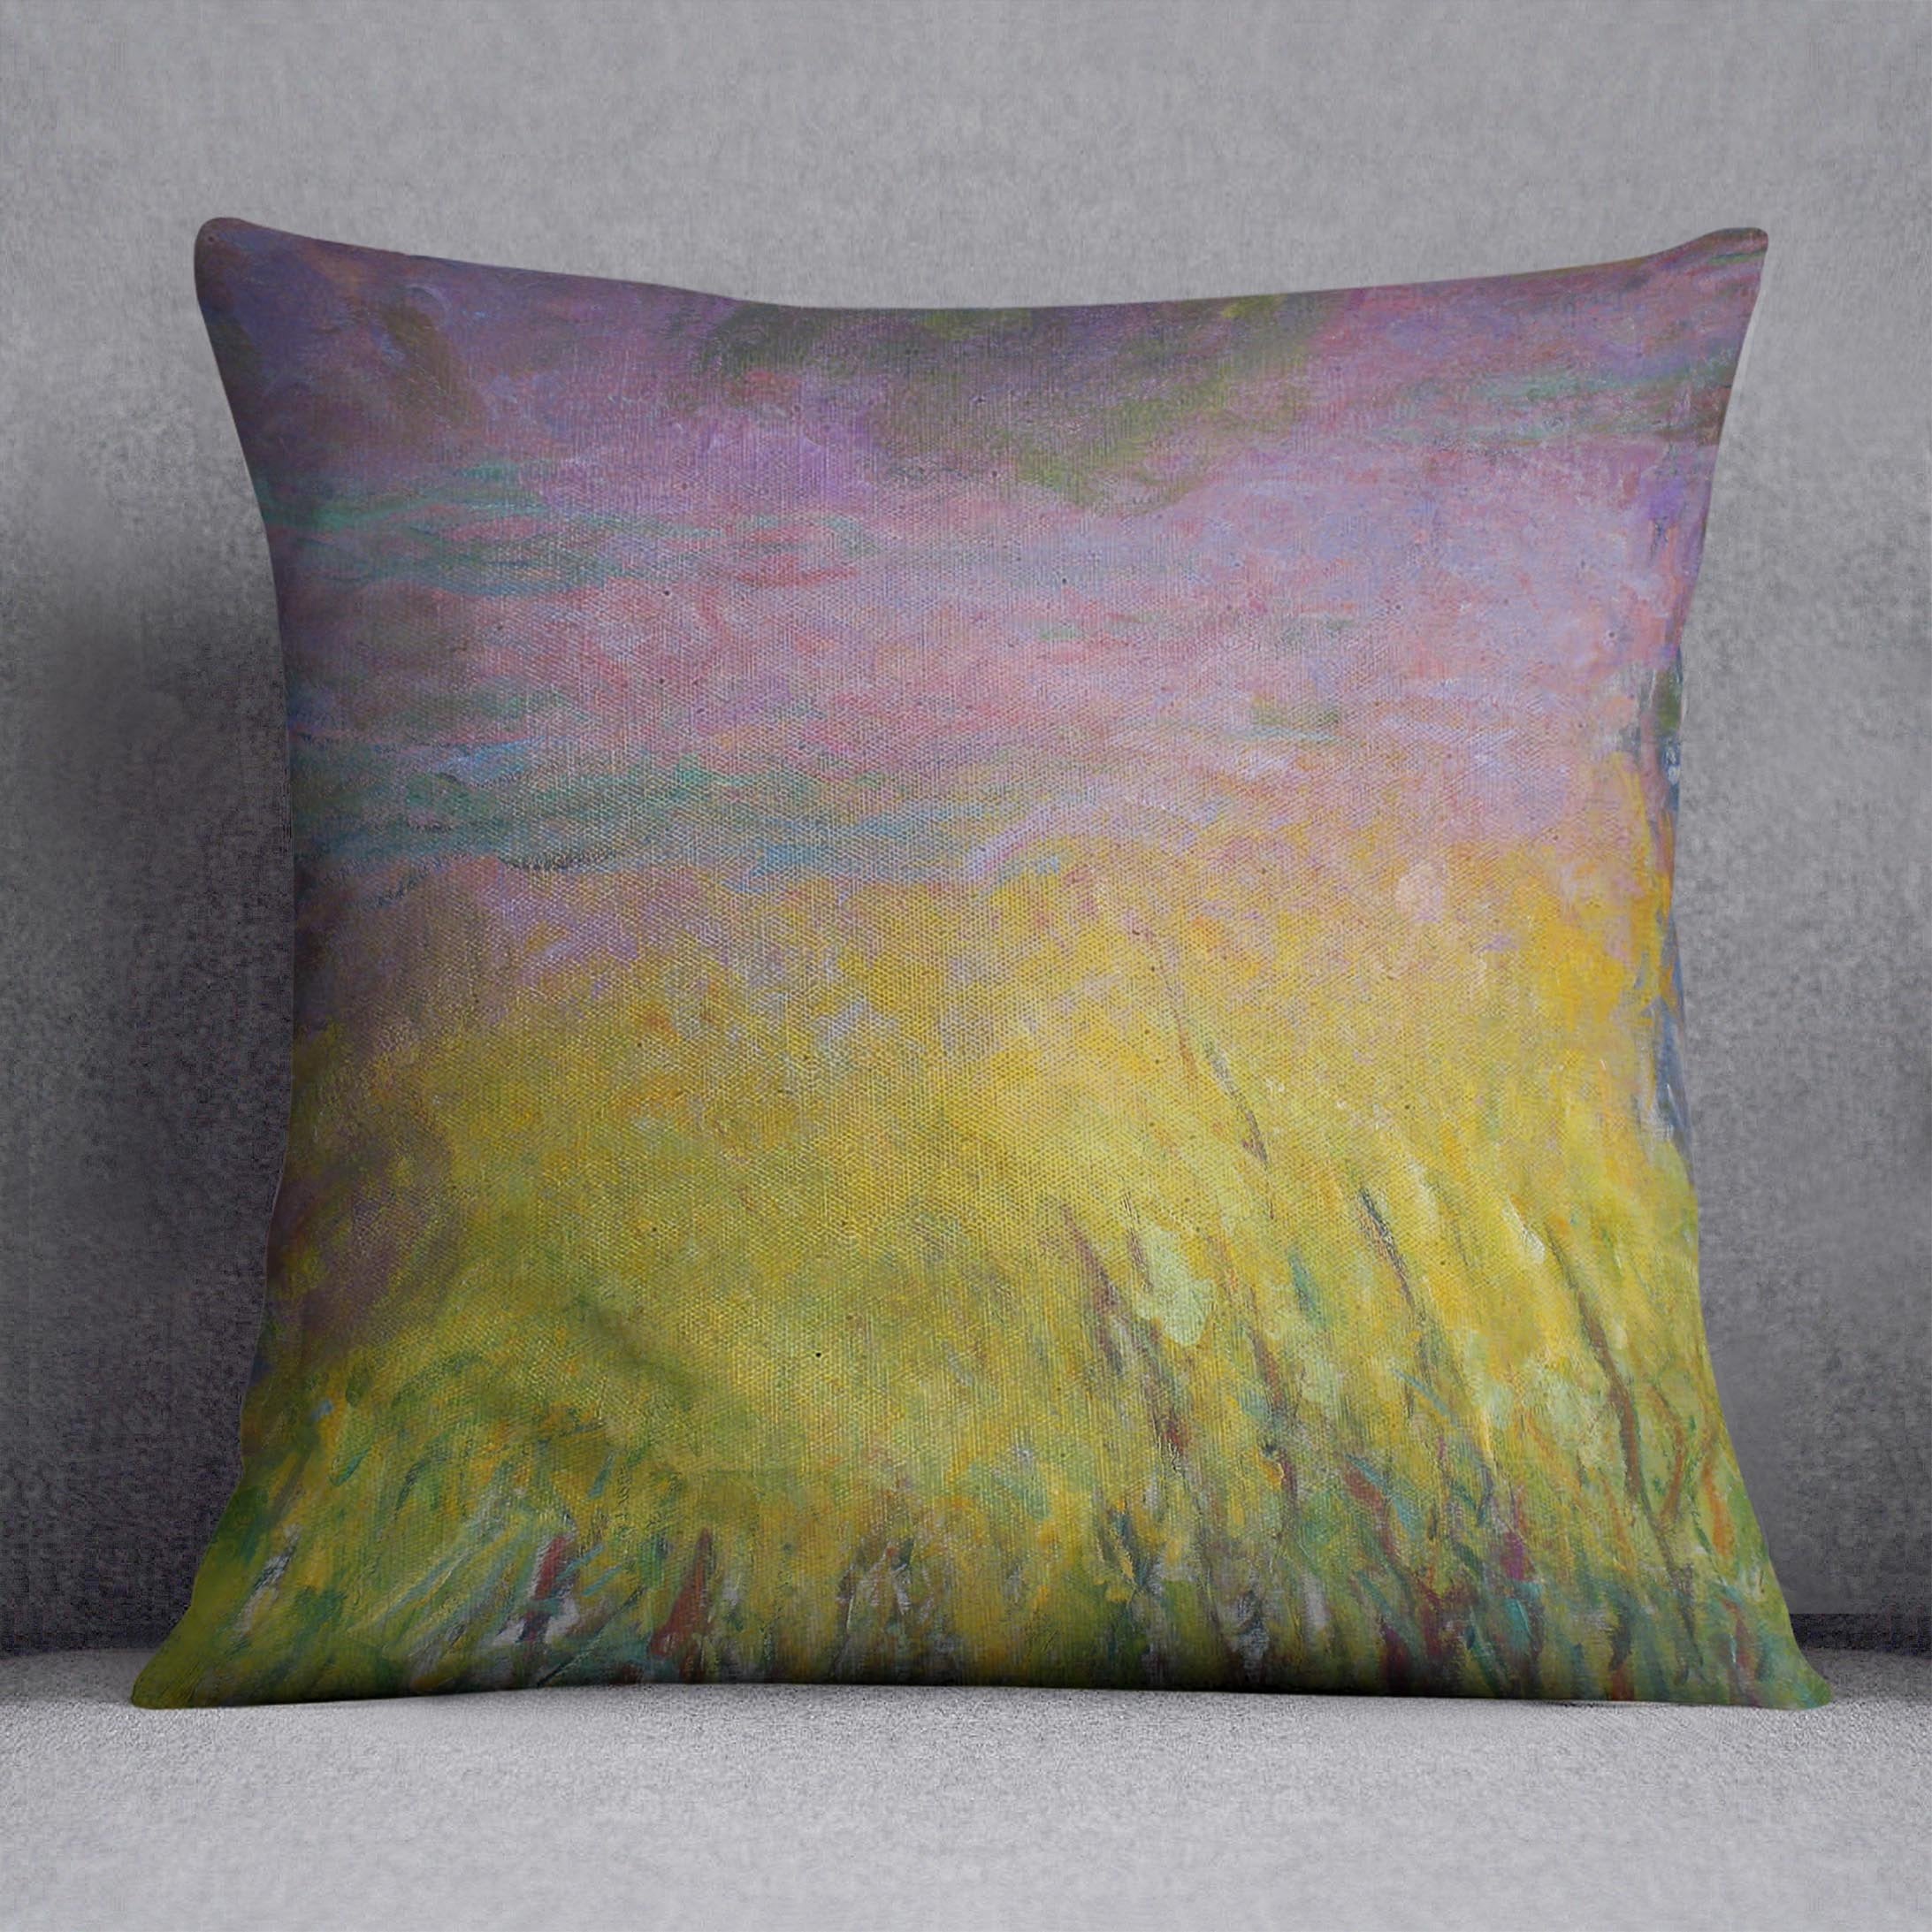 Water Lillies 12 by Monet Throw Pillow